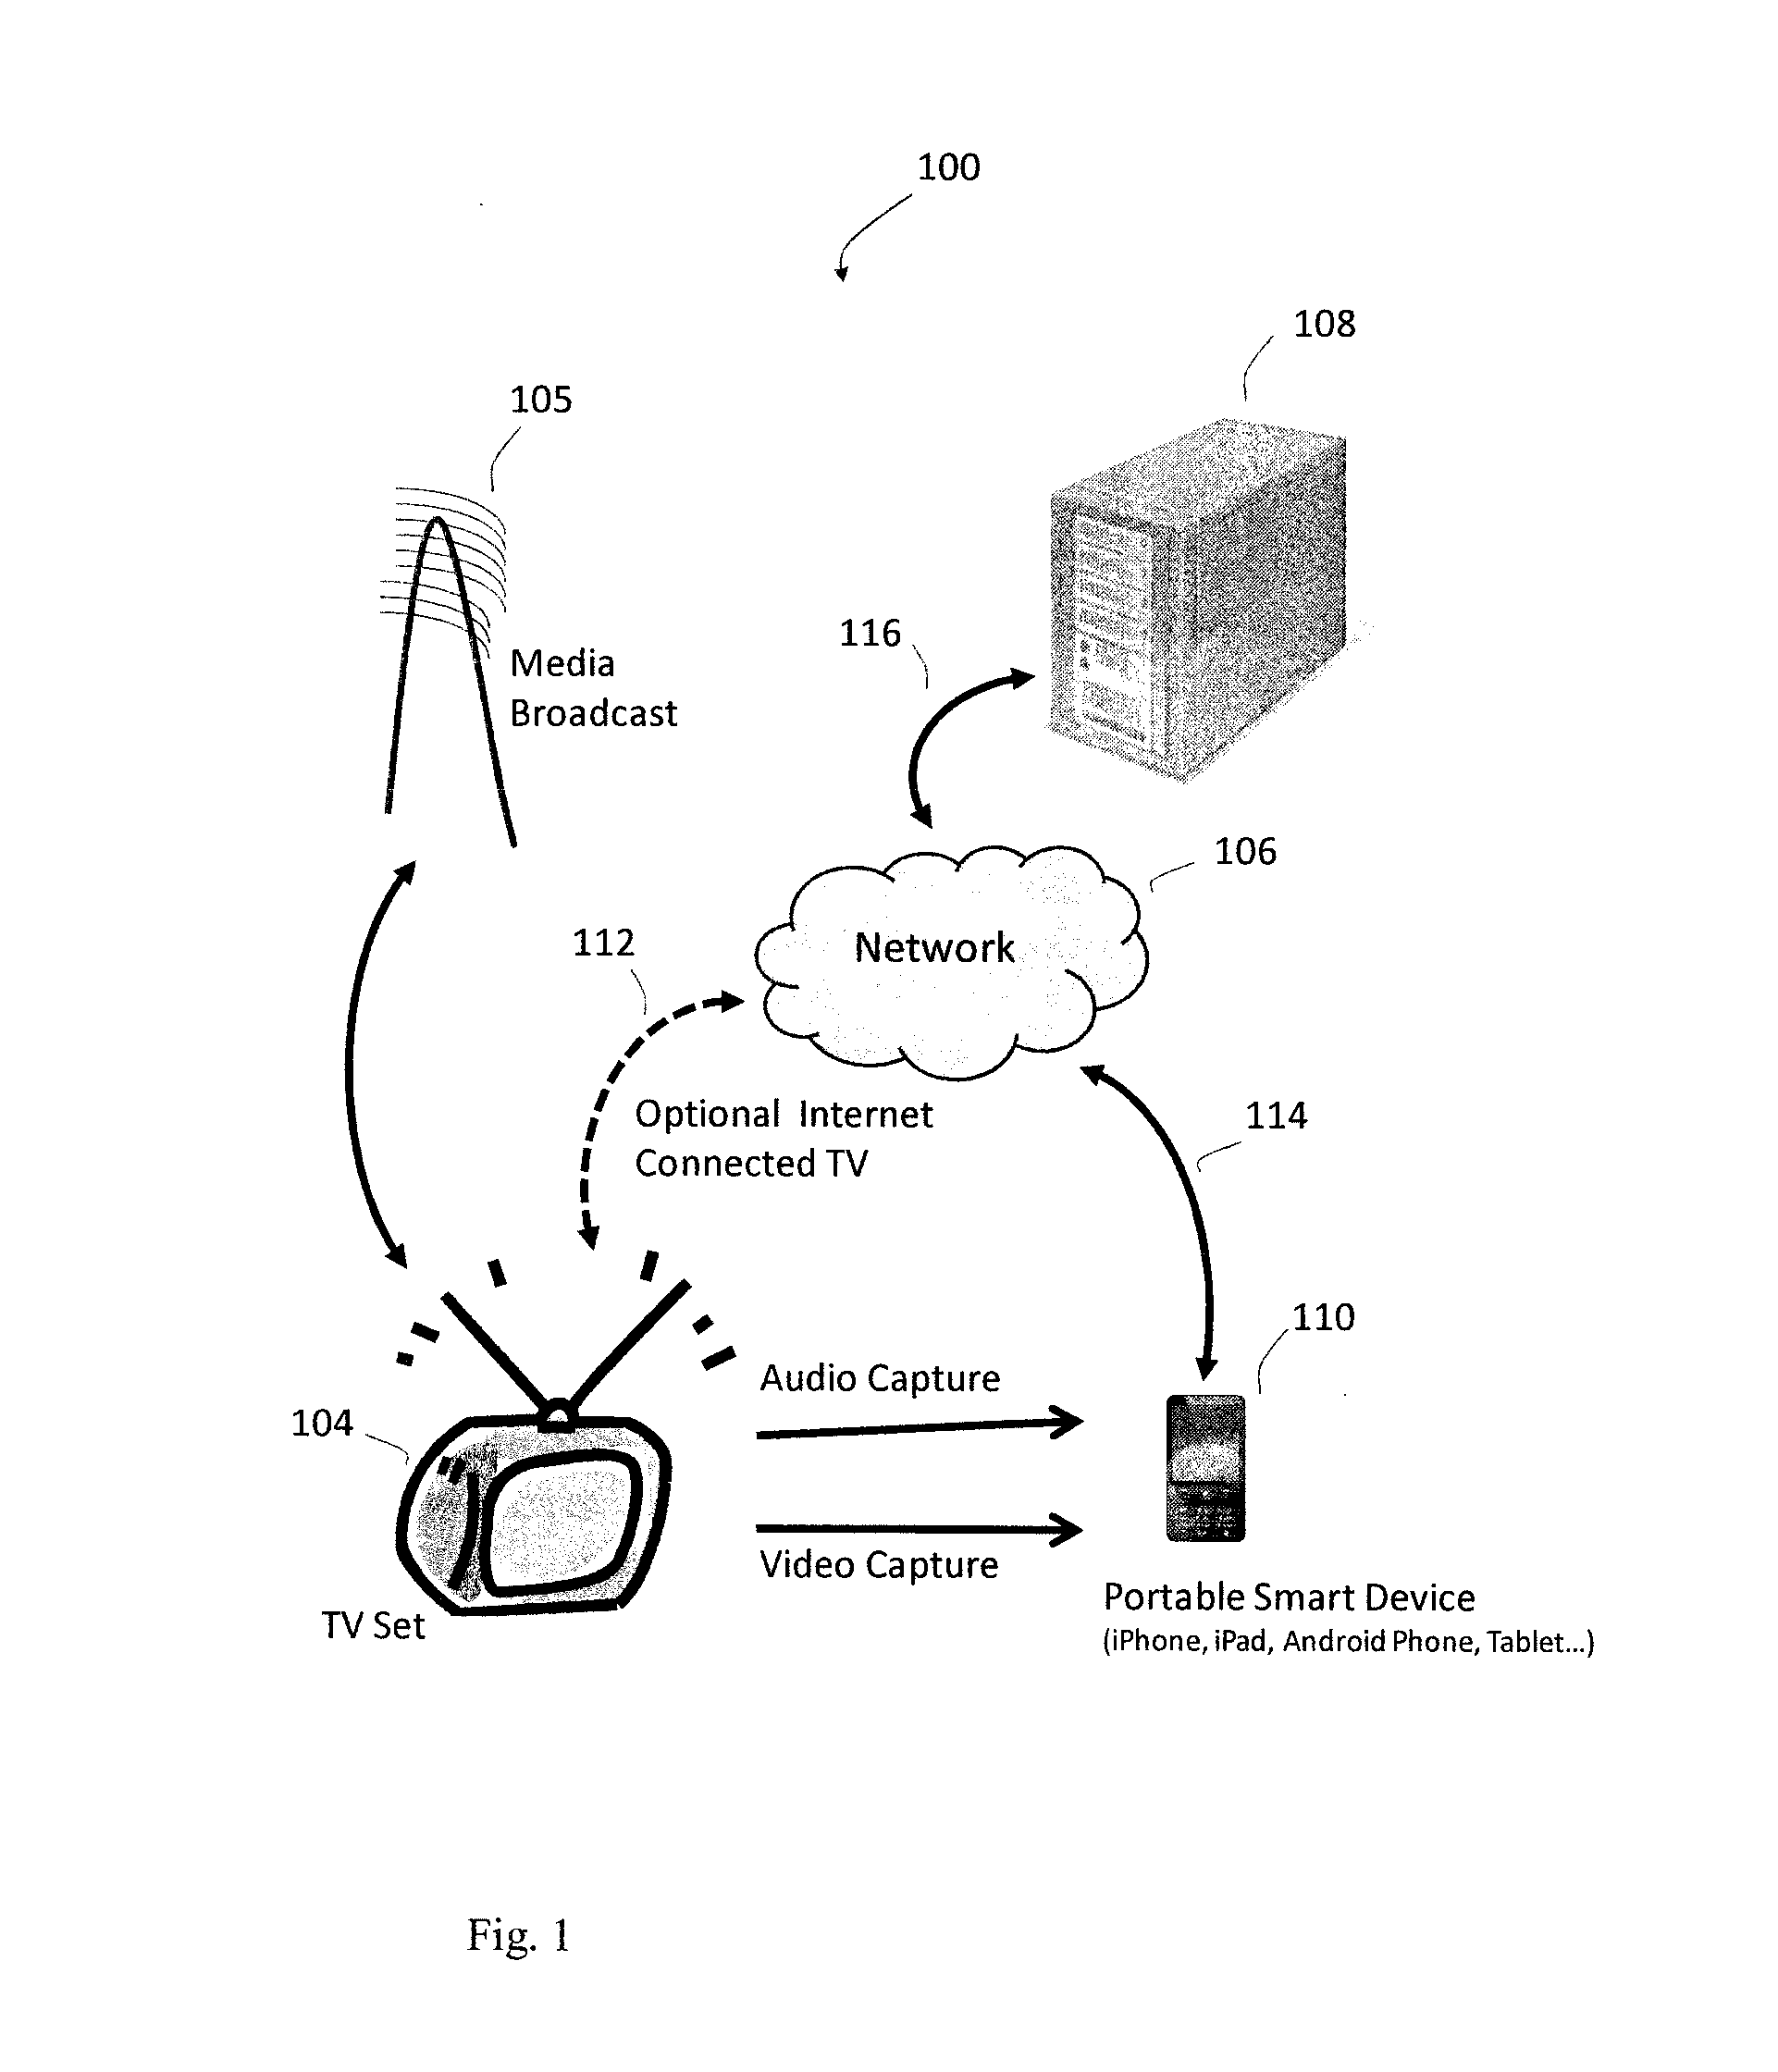 Method for Efficient Database Formation and Search on Media Devices Acting Synchronously with Television Programming